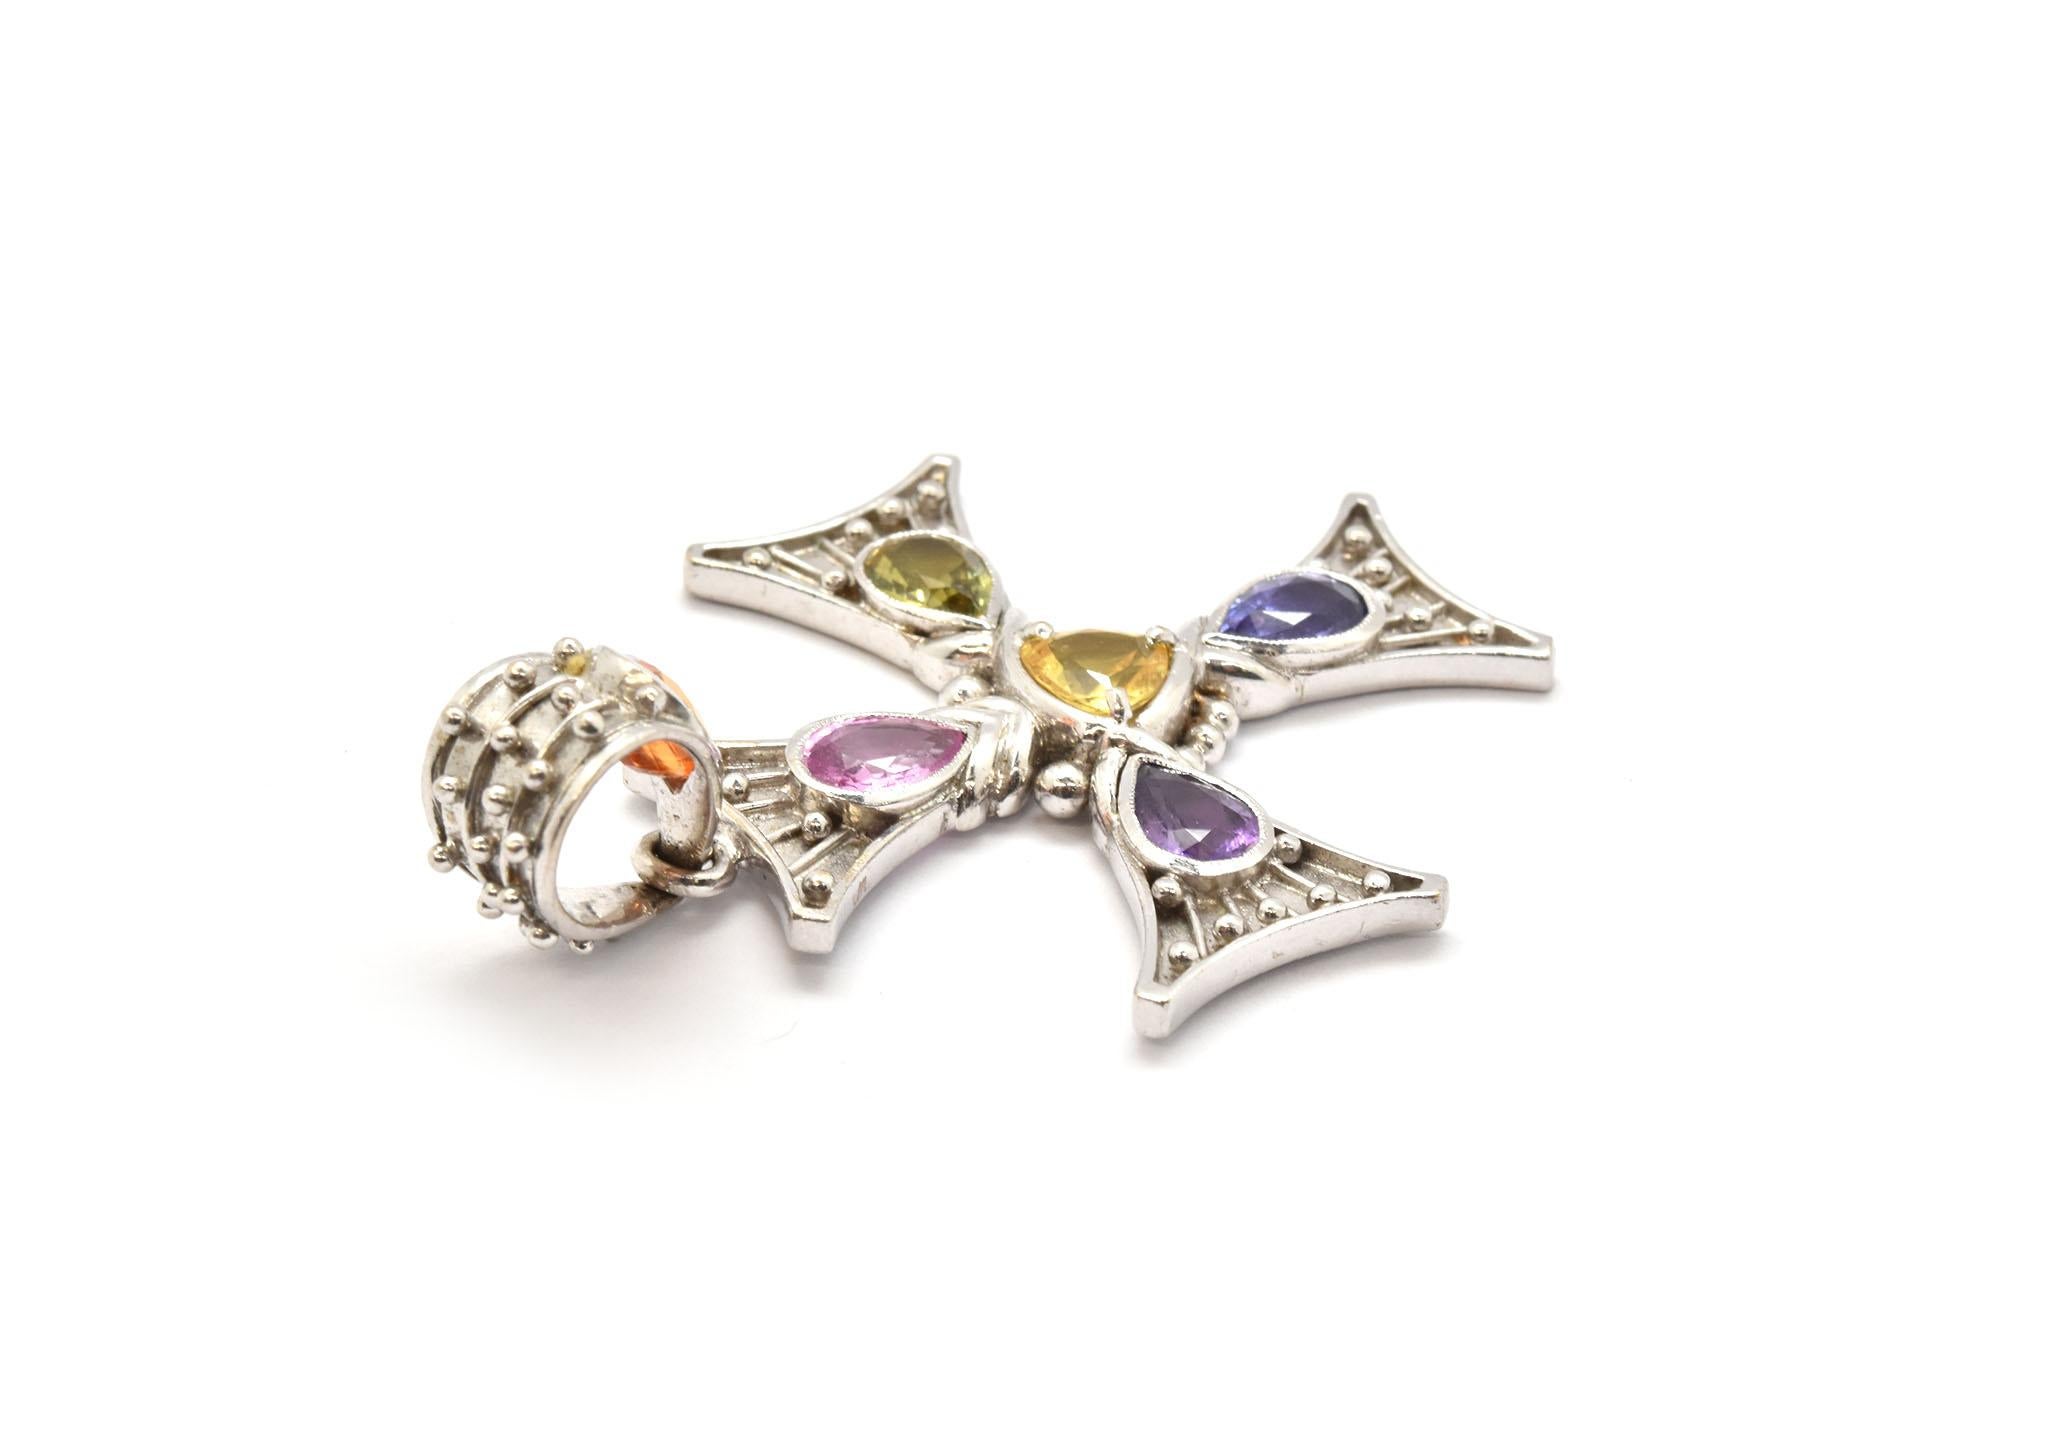 This colorful cross features rainbow colored sapphires set into 18k white gold. The sapphires are orange, pink, yellow, green, purple and blue for a total weight of approximately 6 carats. The cross measures 50x35mm, weighs 14.55 grams.